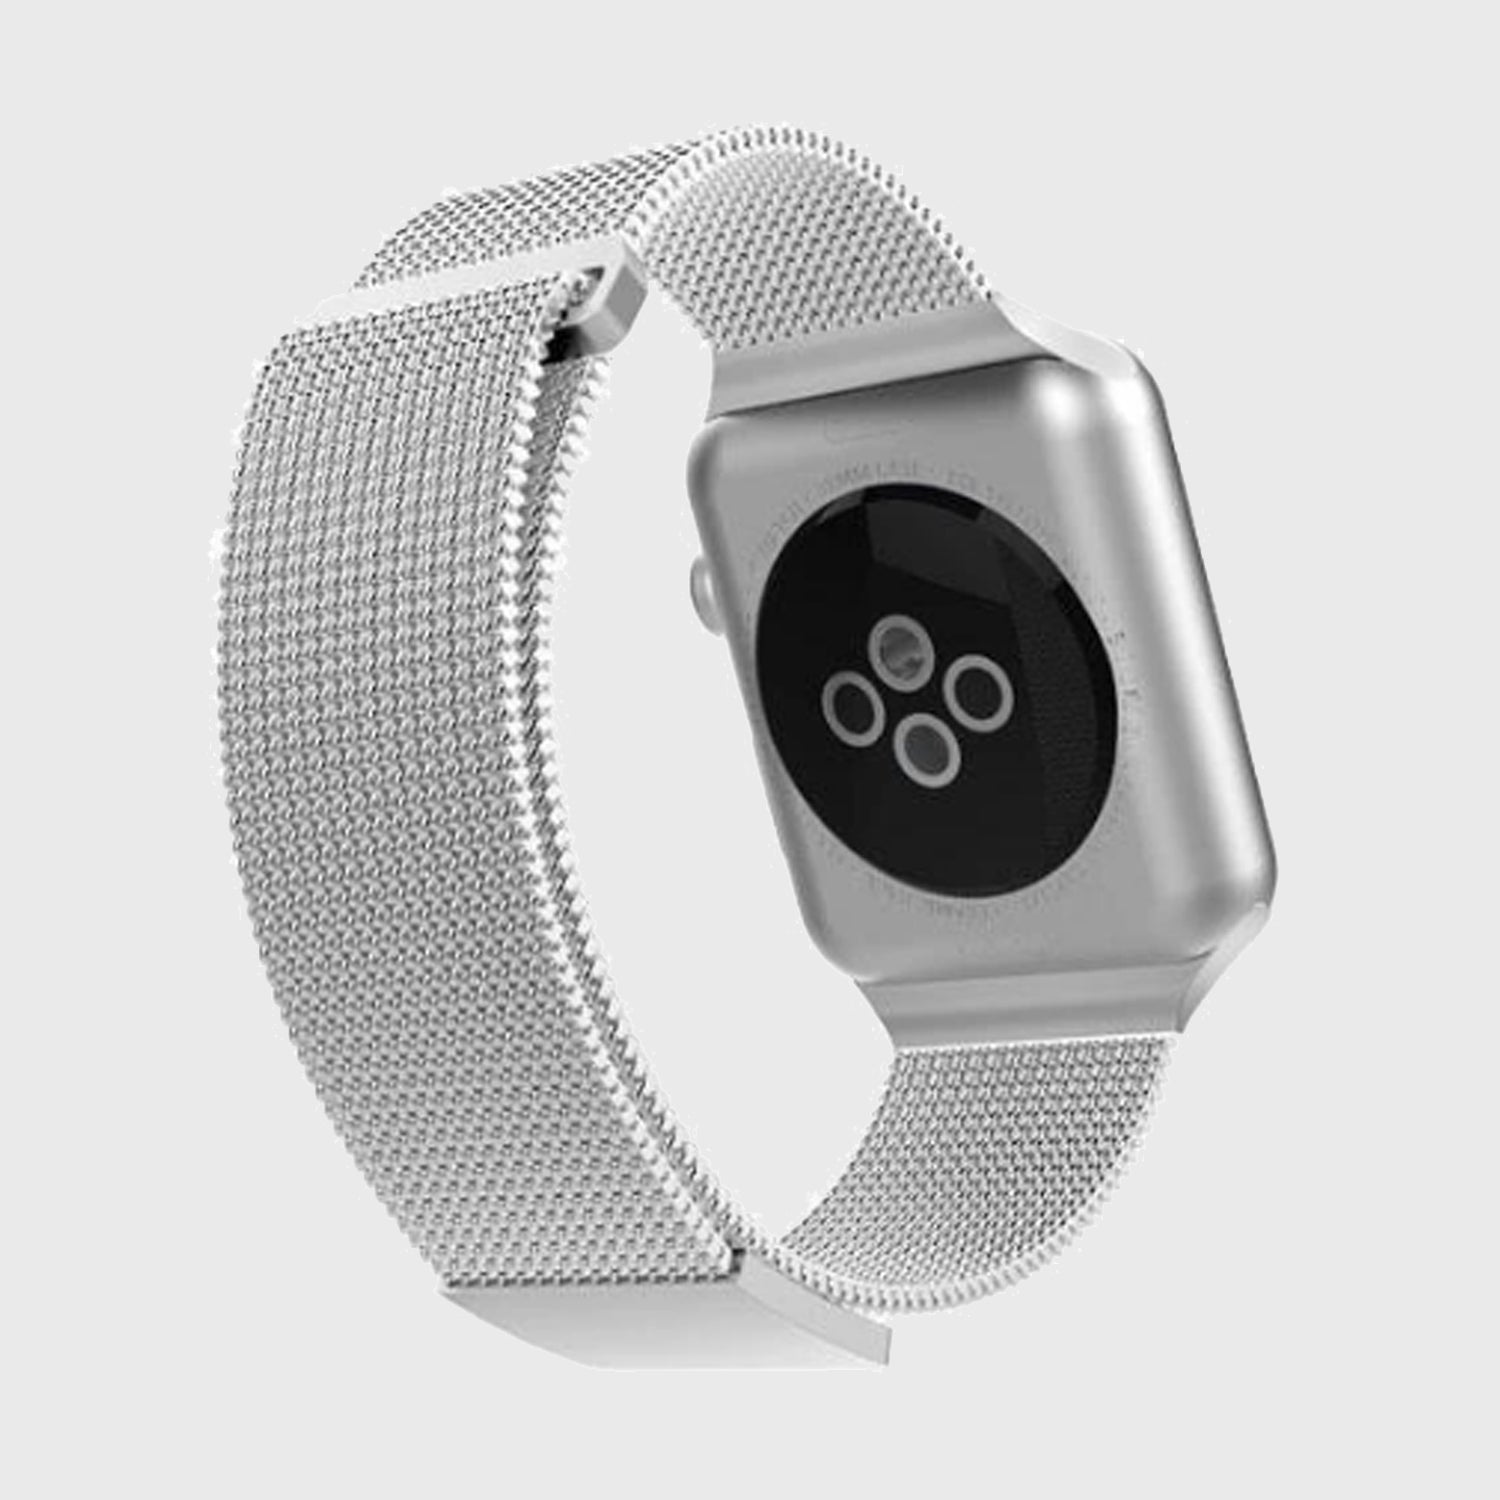 A Raptic stainless steel mesh band for an Apple Watch on a white background.